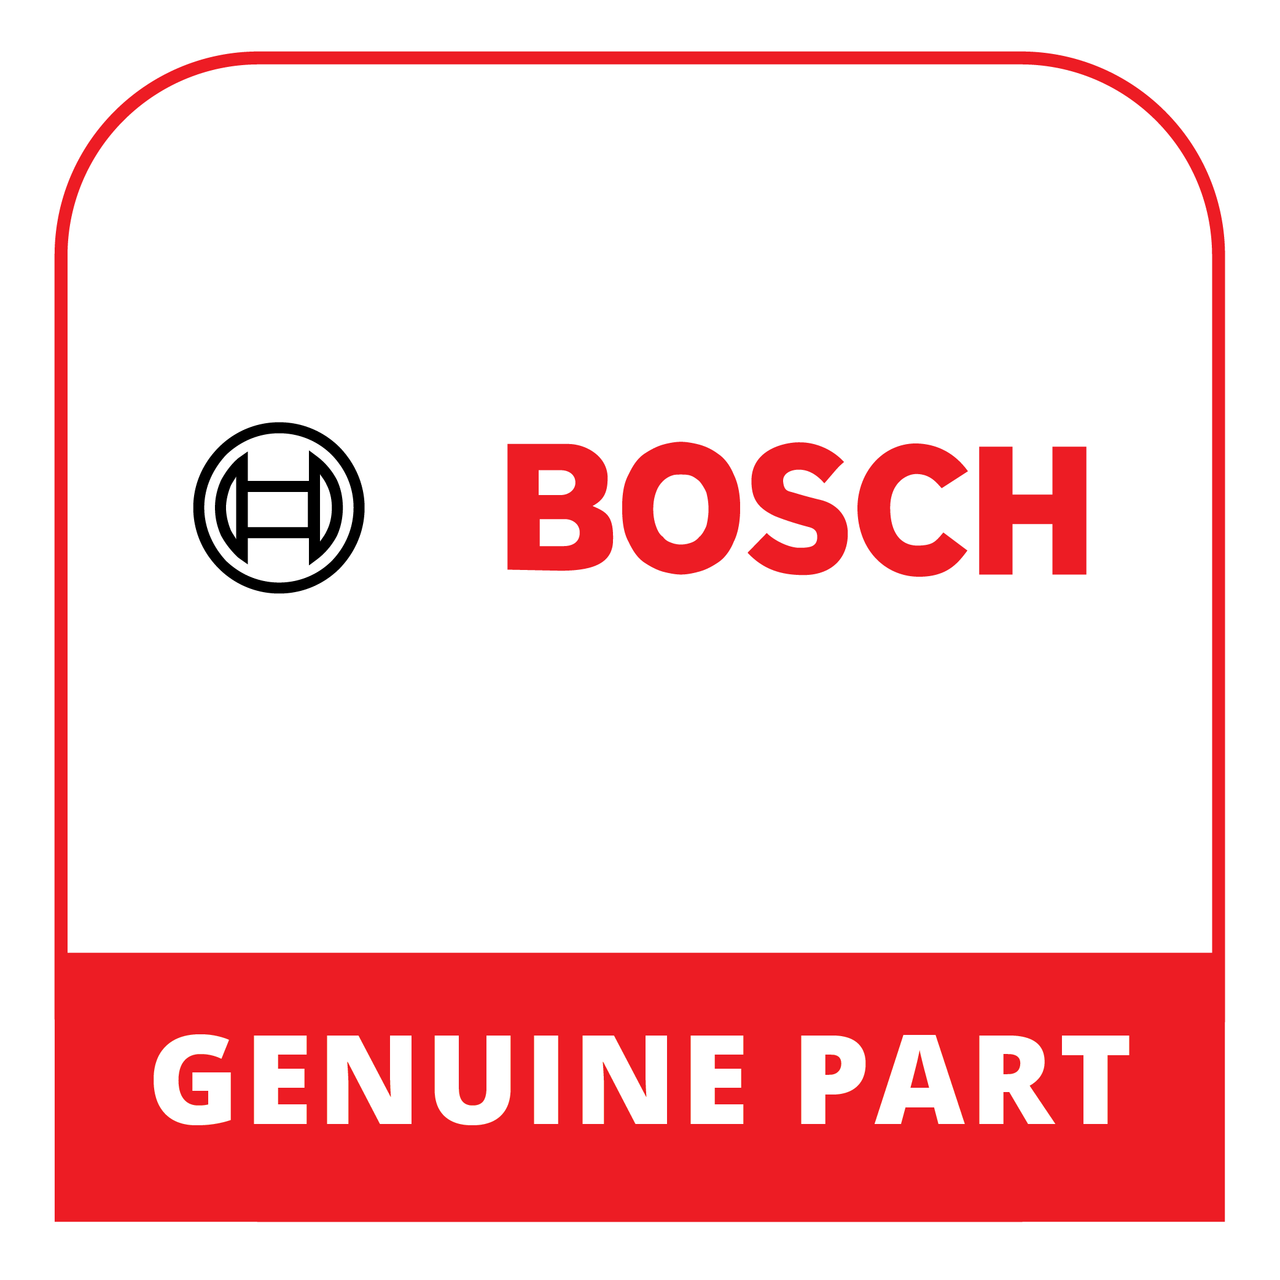 Bosch (Thermador) 20000878 - Housing Part - Genuine Bosch (Thermador) Part